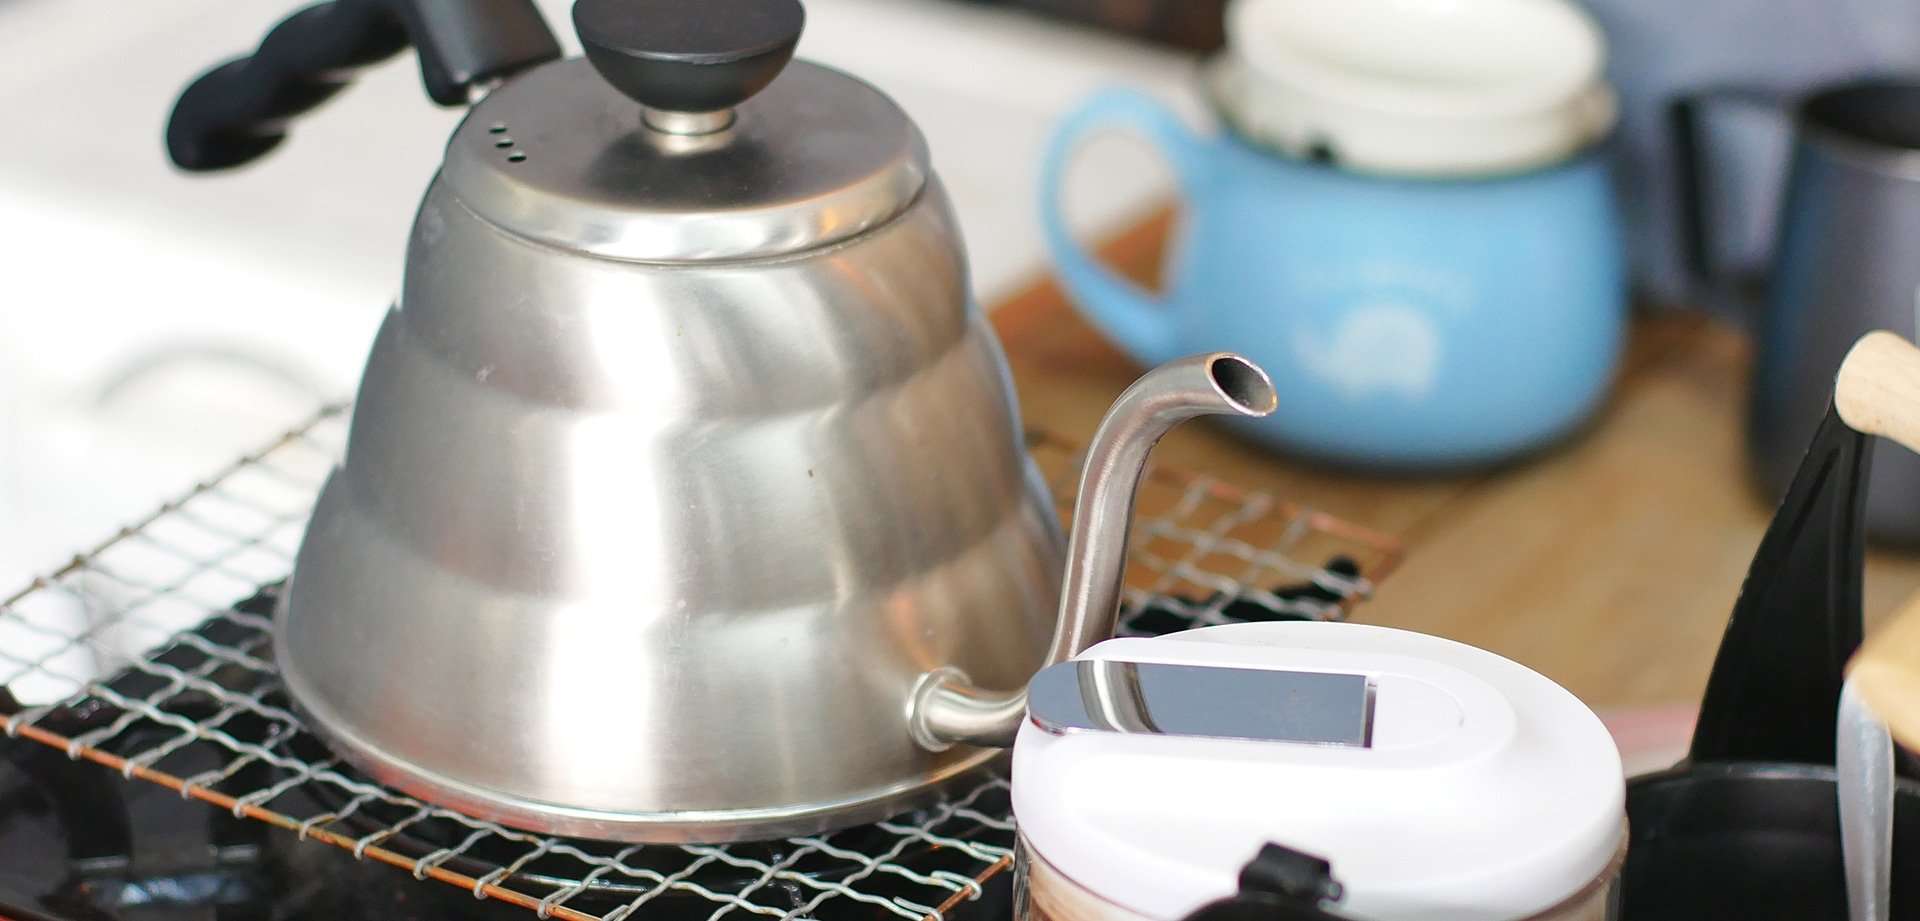 How To Clean A Stainless Steel Coffee Pot?